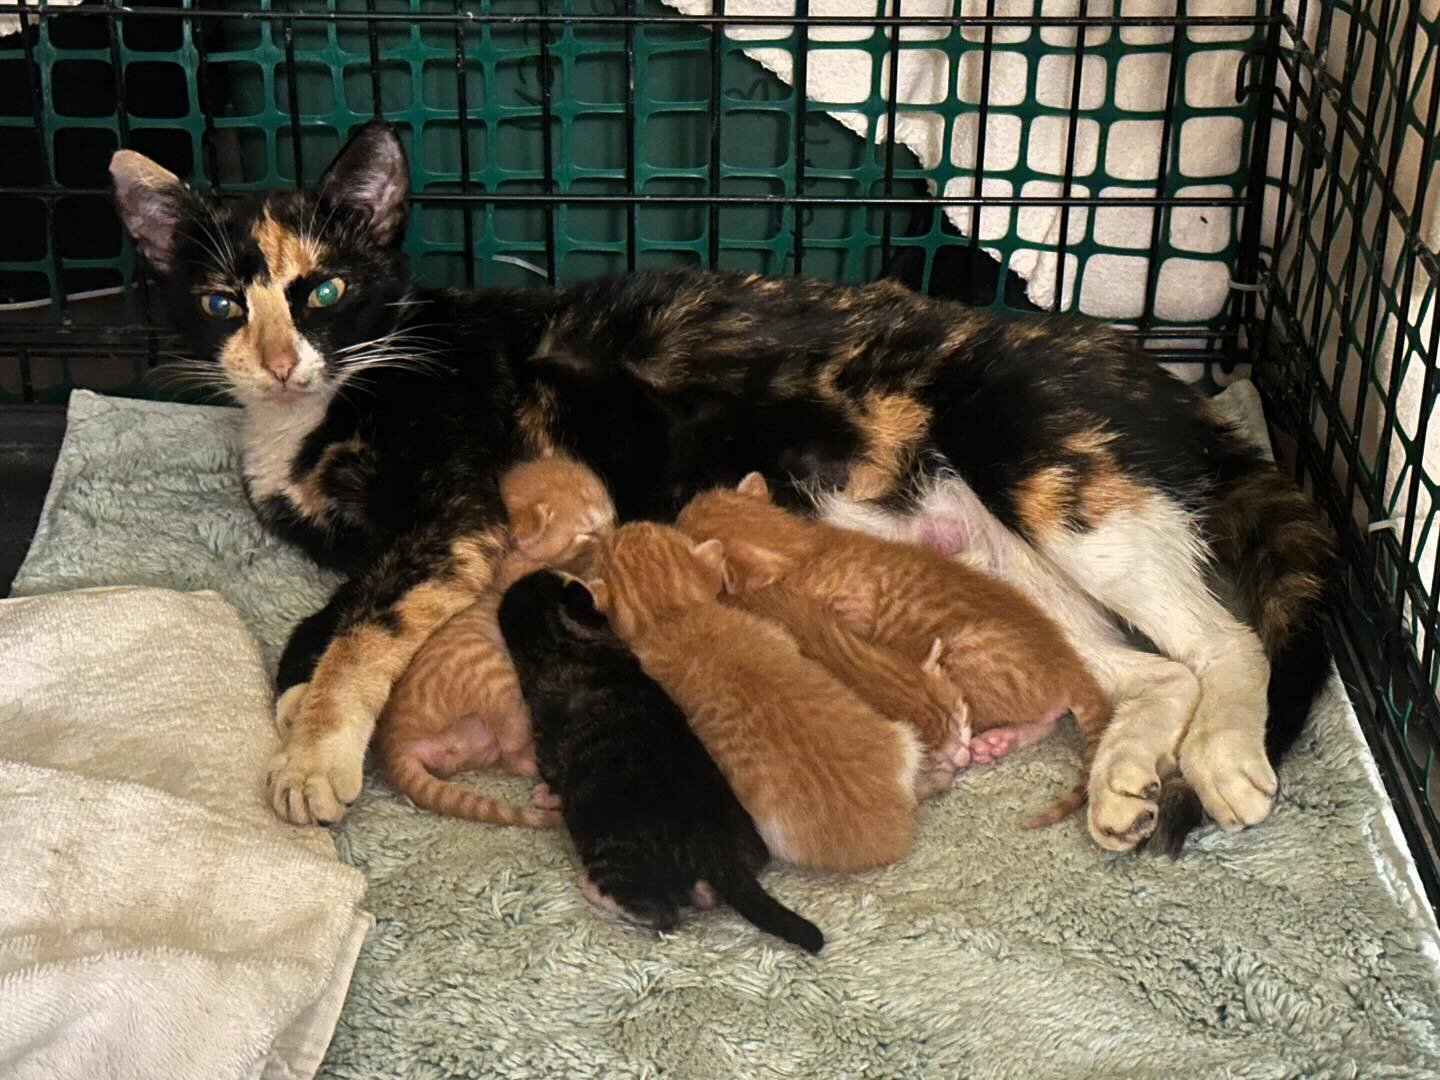 Update: Mama and her 5 kittens are doing well. They will remain in foster care until the kittens reach an appropriate age for spaying/neutering and are ready to be put up for adoption. Each donation received will directly contribute to the ongoing su